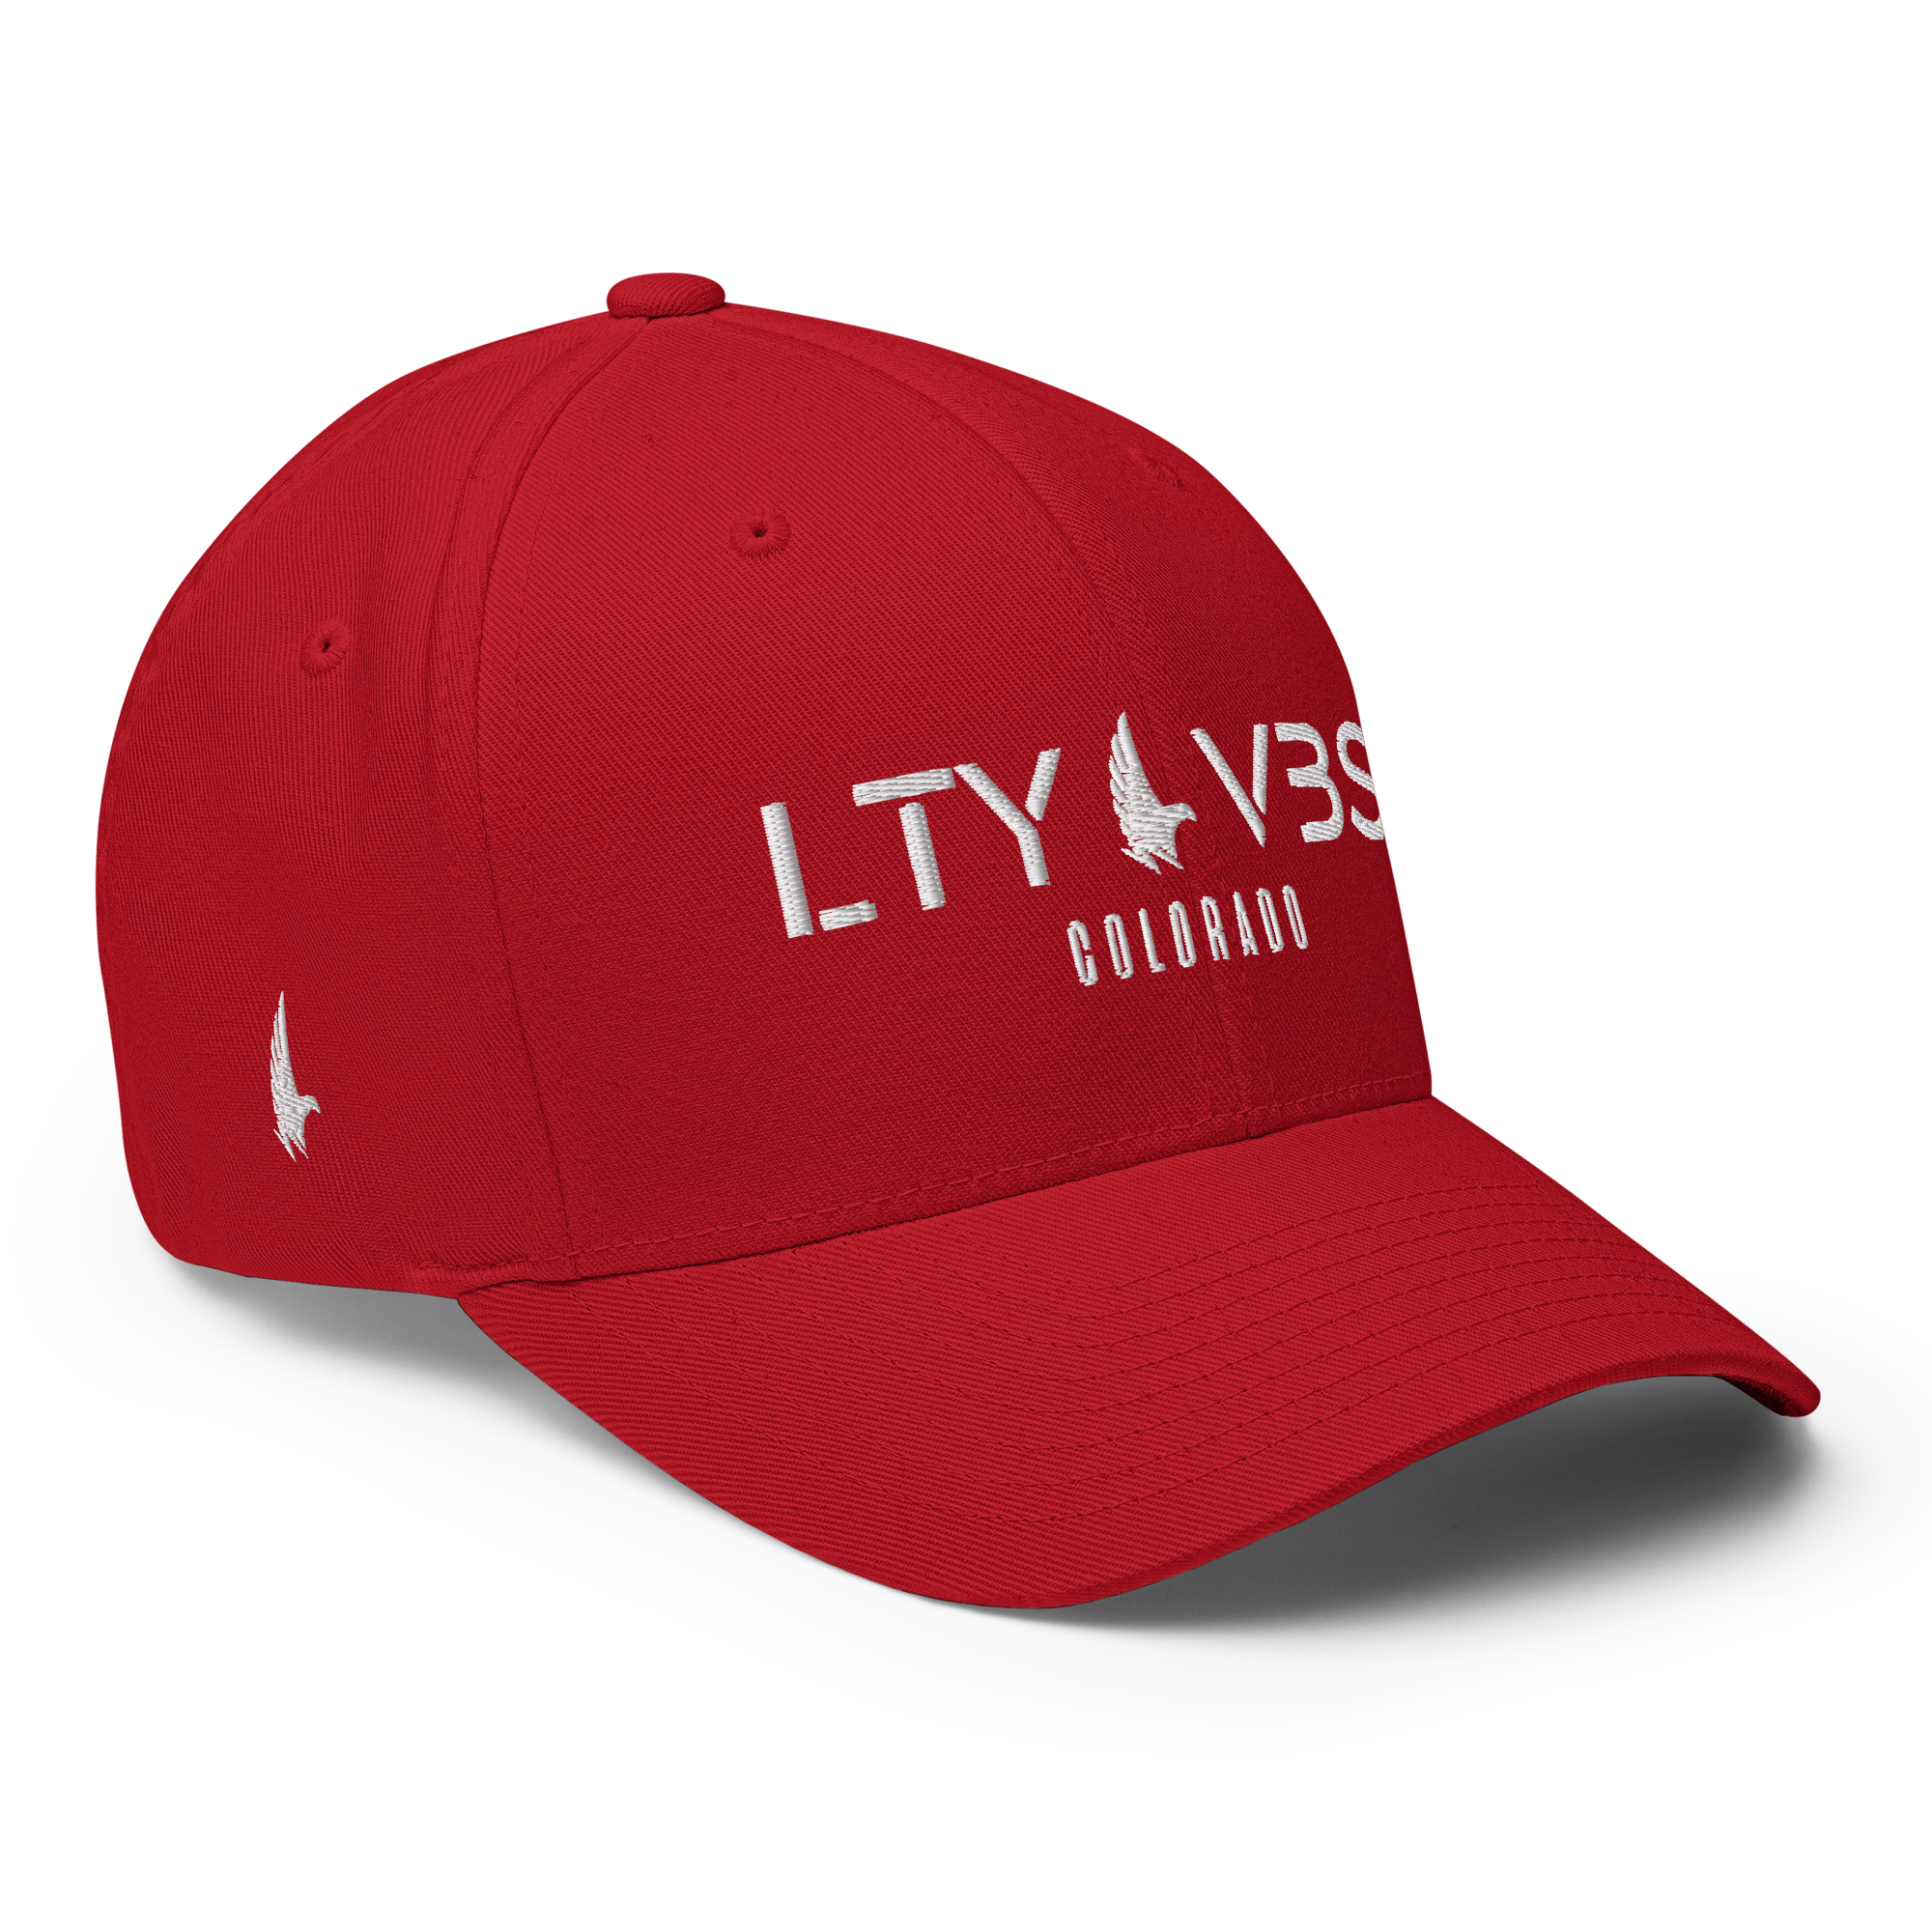 Loyalty Era Colorado Fitted Hat Red / White Fitted - Loyalty Vibes